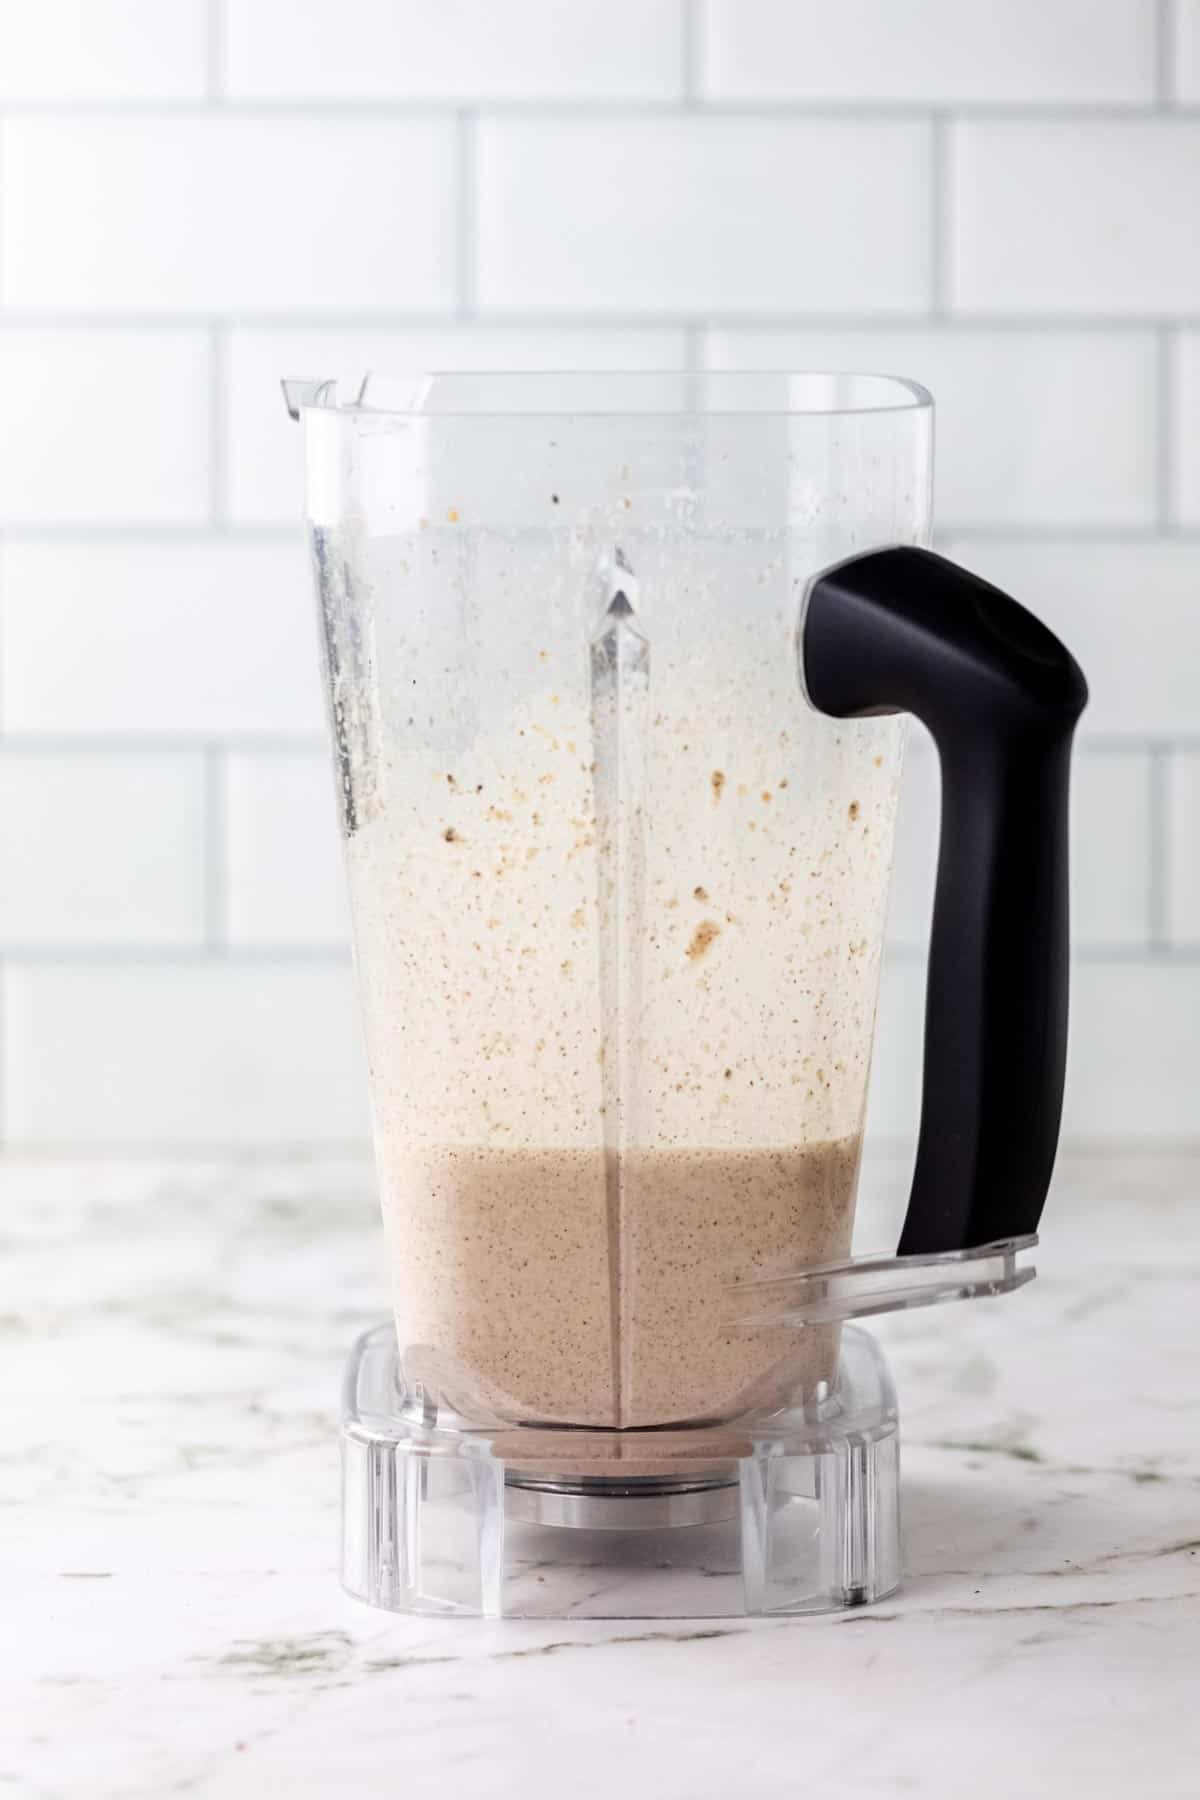 Puréed smoothie in a blender.